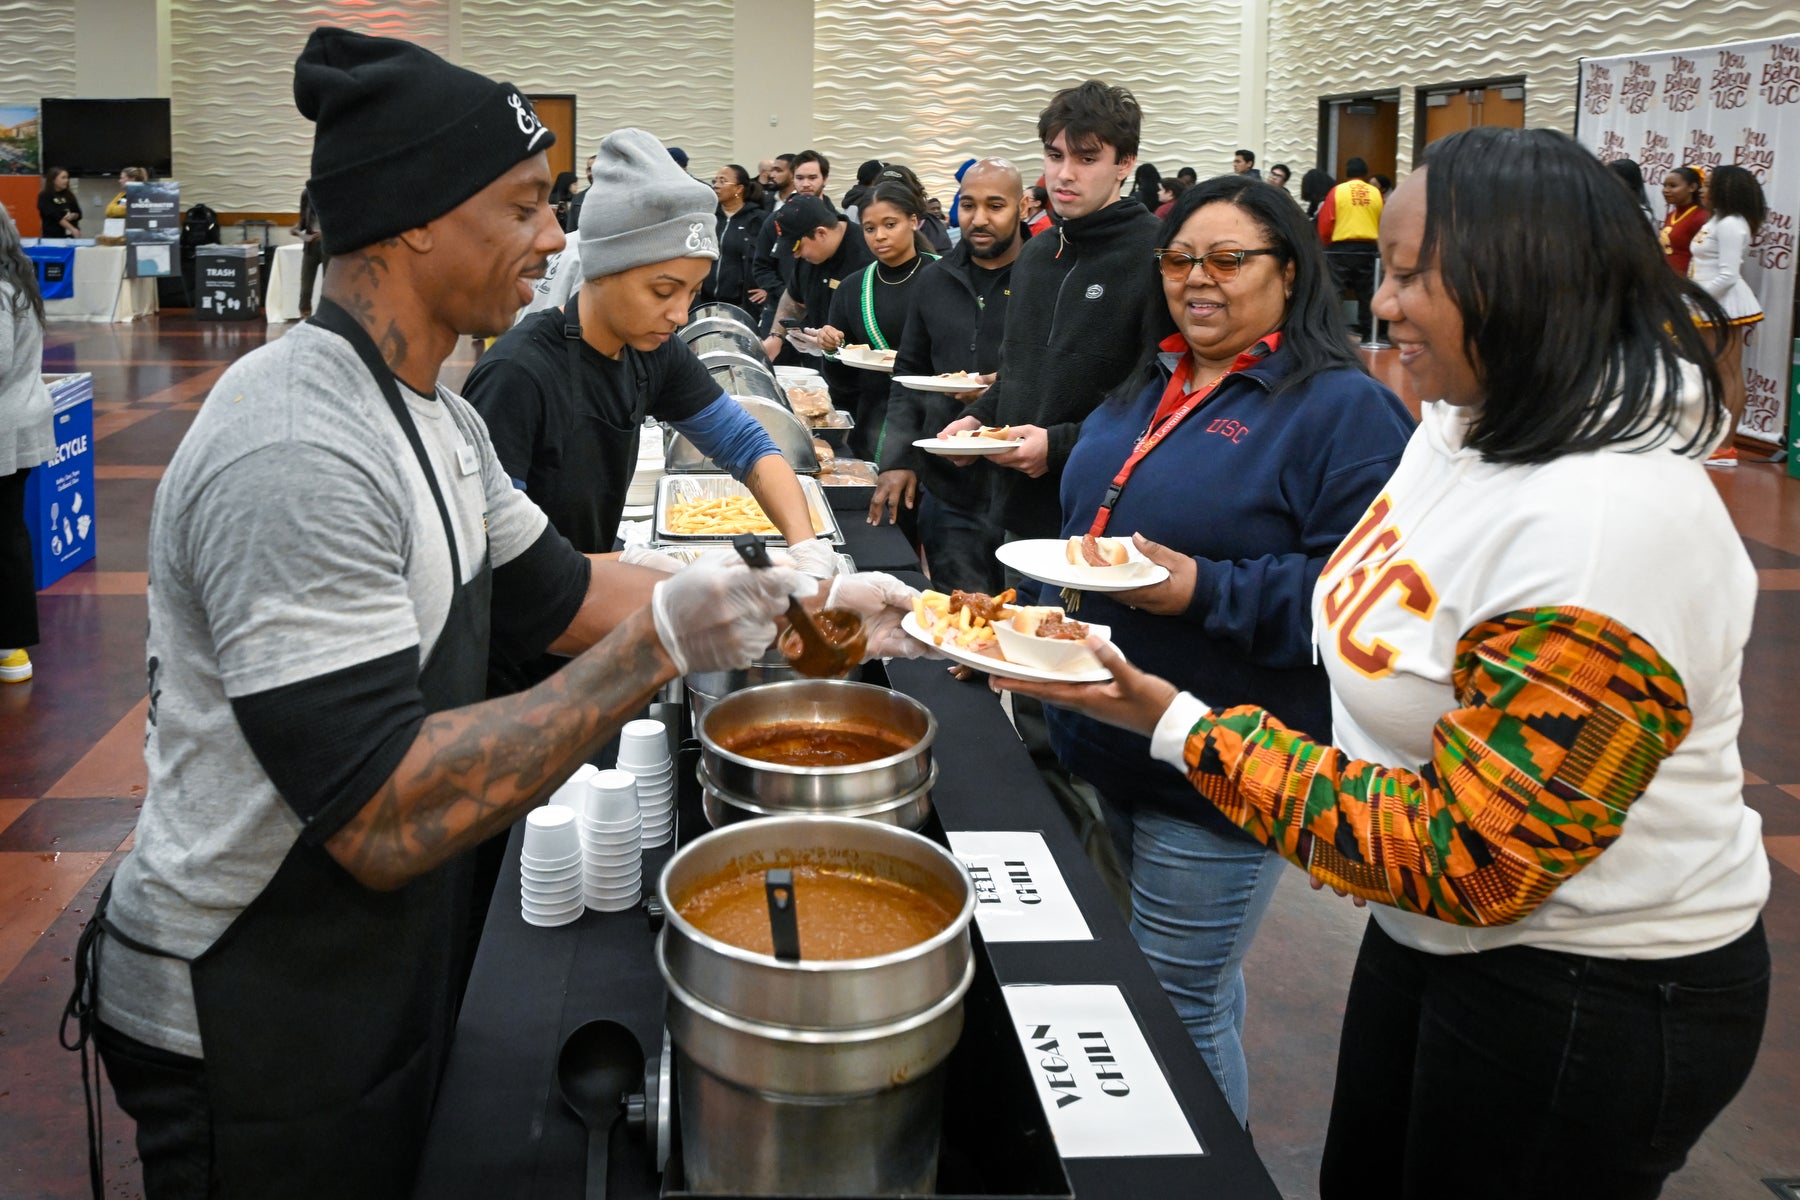 USC Black History Month wrap-up event: hot dogs and chili